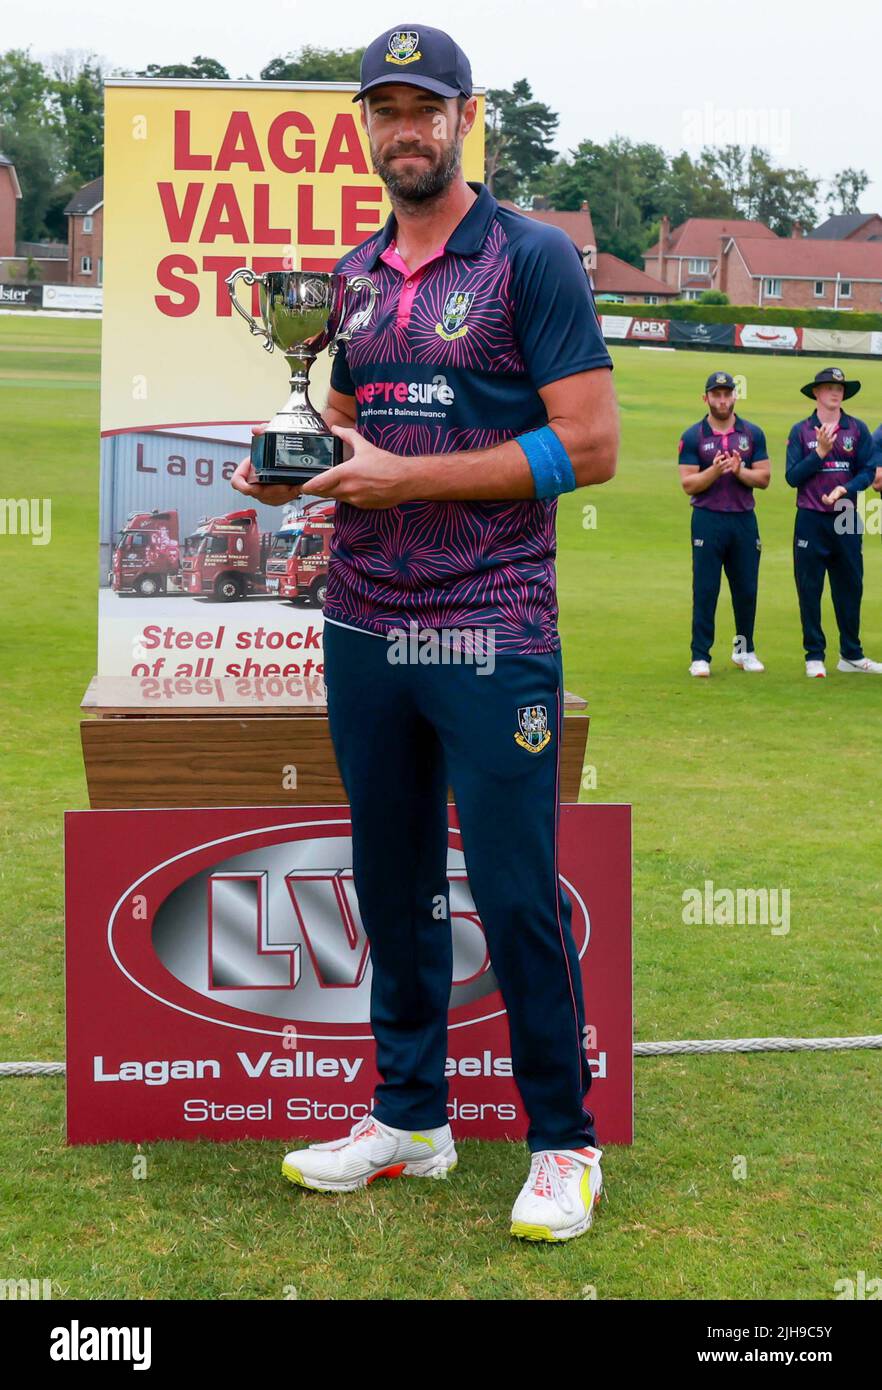 The Lawn, Waringstown, Northern Ireland, UK. 16 Jul 2022. The Lagan Valley Steels Twenty 20 Cup Final 2022. CIYMS v CSNI – CIYMS won by 16 runs (DLS) in a rain-affected match. CIYMD captain Nigel Jones with the Lagan Valley Steel T20 Cup. Credit: David Hunter/Alamy Live News Stock Photo